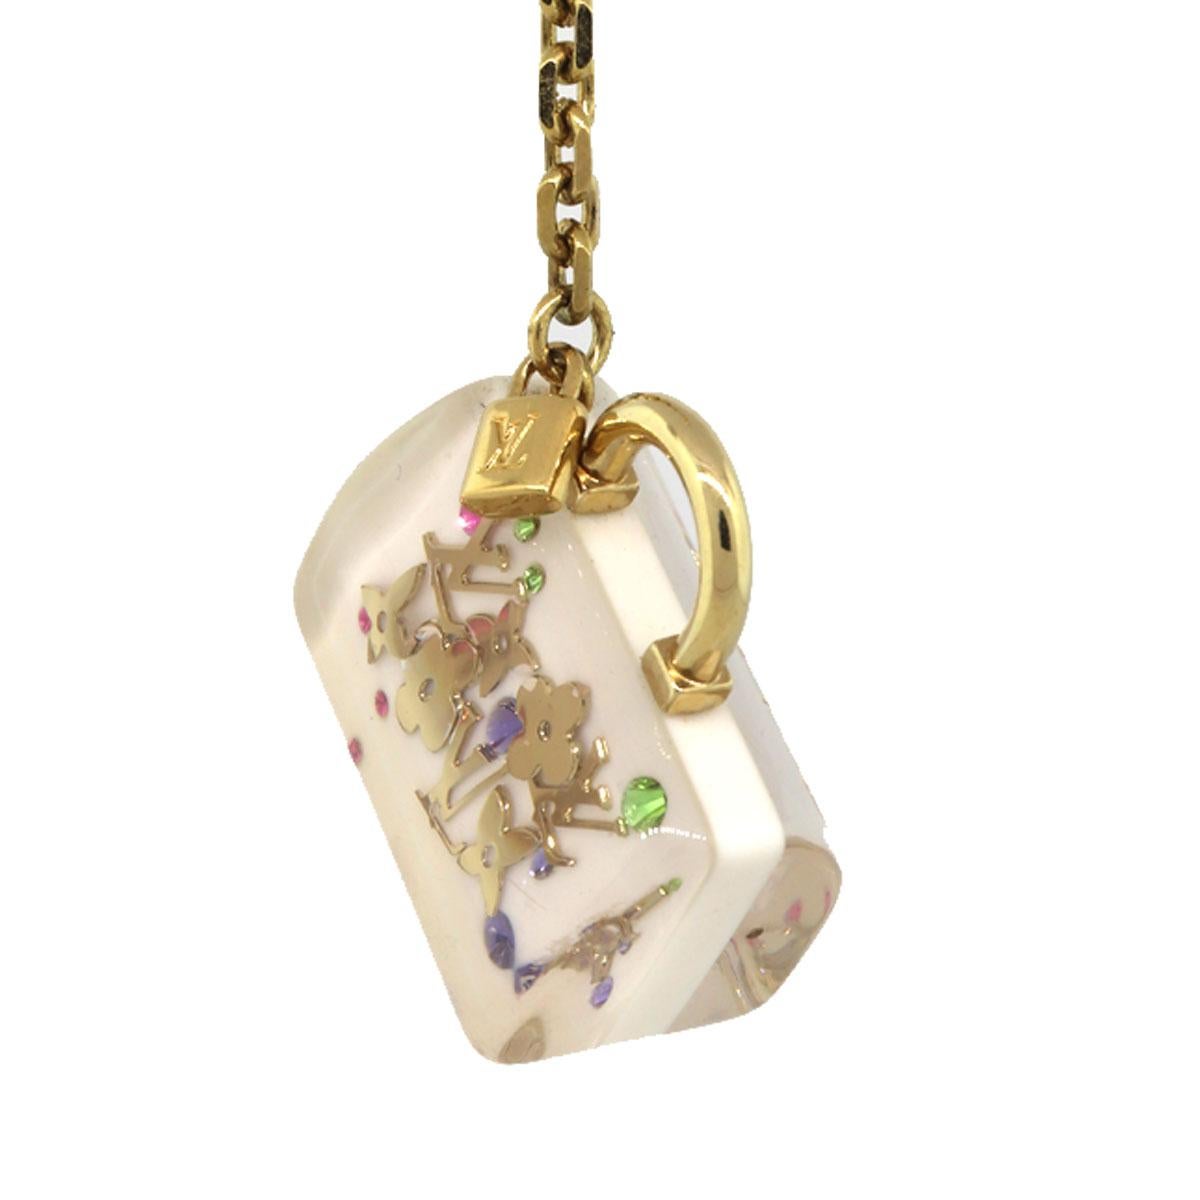 Company-Louis Vuitton
Model-White Inclusion Speedy Multi Color Handbag Charm Key Chain
Color-White
Date Code-N/A
Material-Clear resin featuring gold and multi-color
Measurements- Length: 1.5